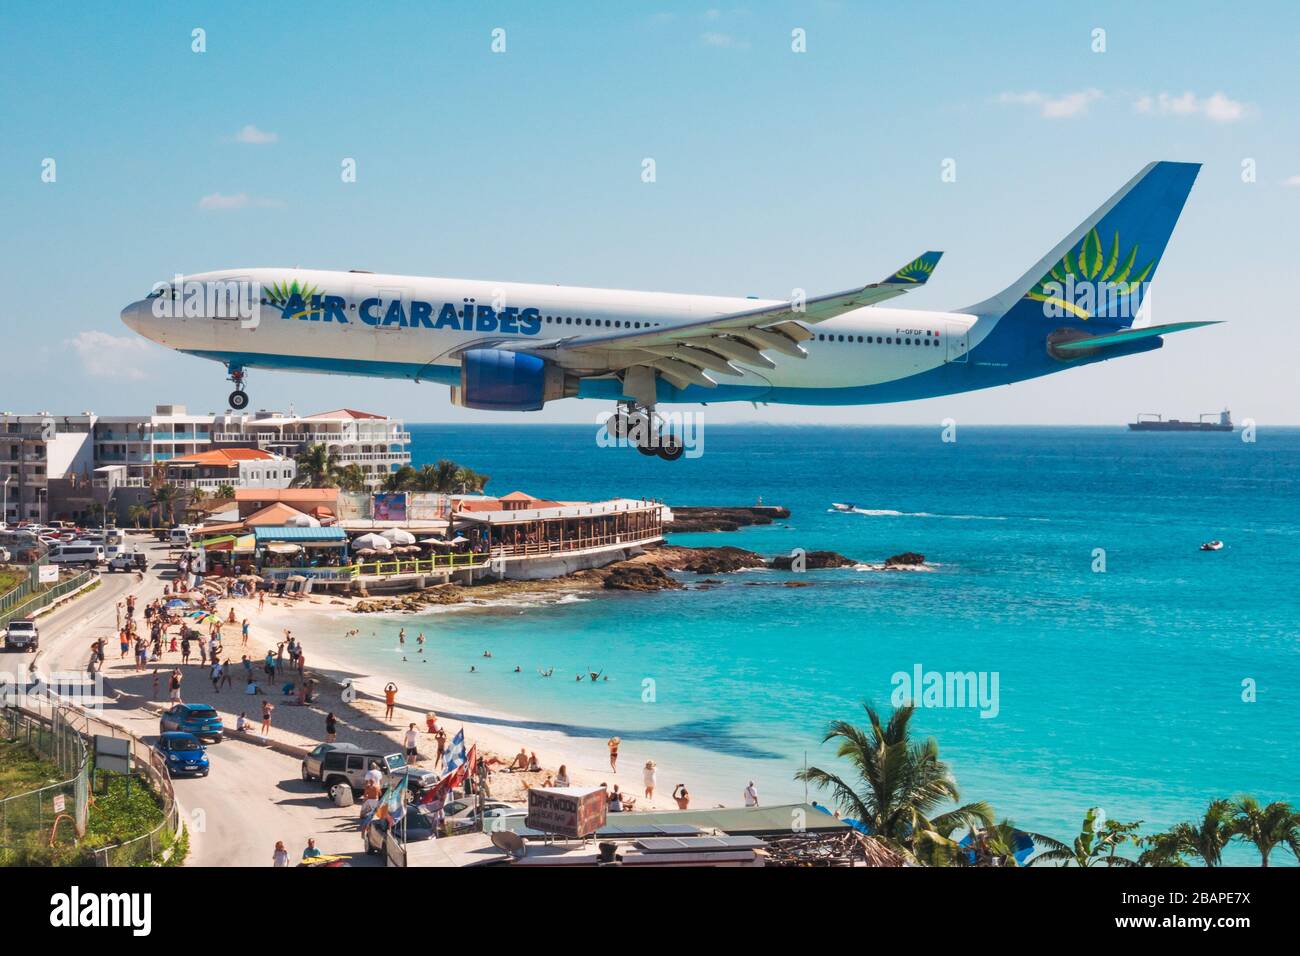 An Airbus A330-200 series operated by Air Caraibes casts a shadow over tourists on Maho Beach, St. Maarten Stock Photo